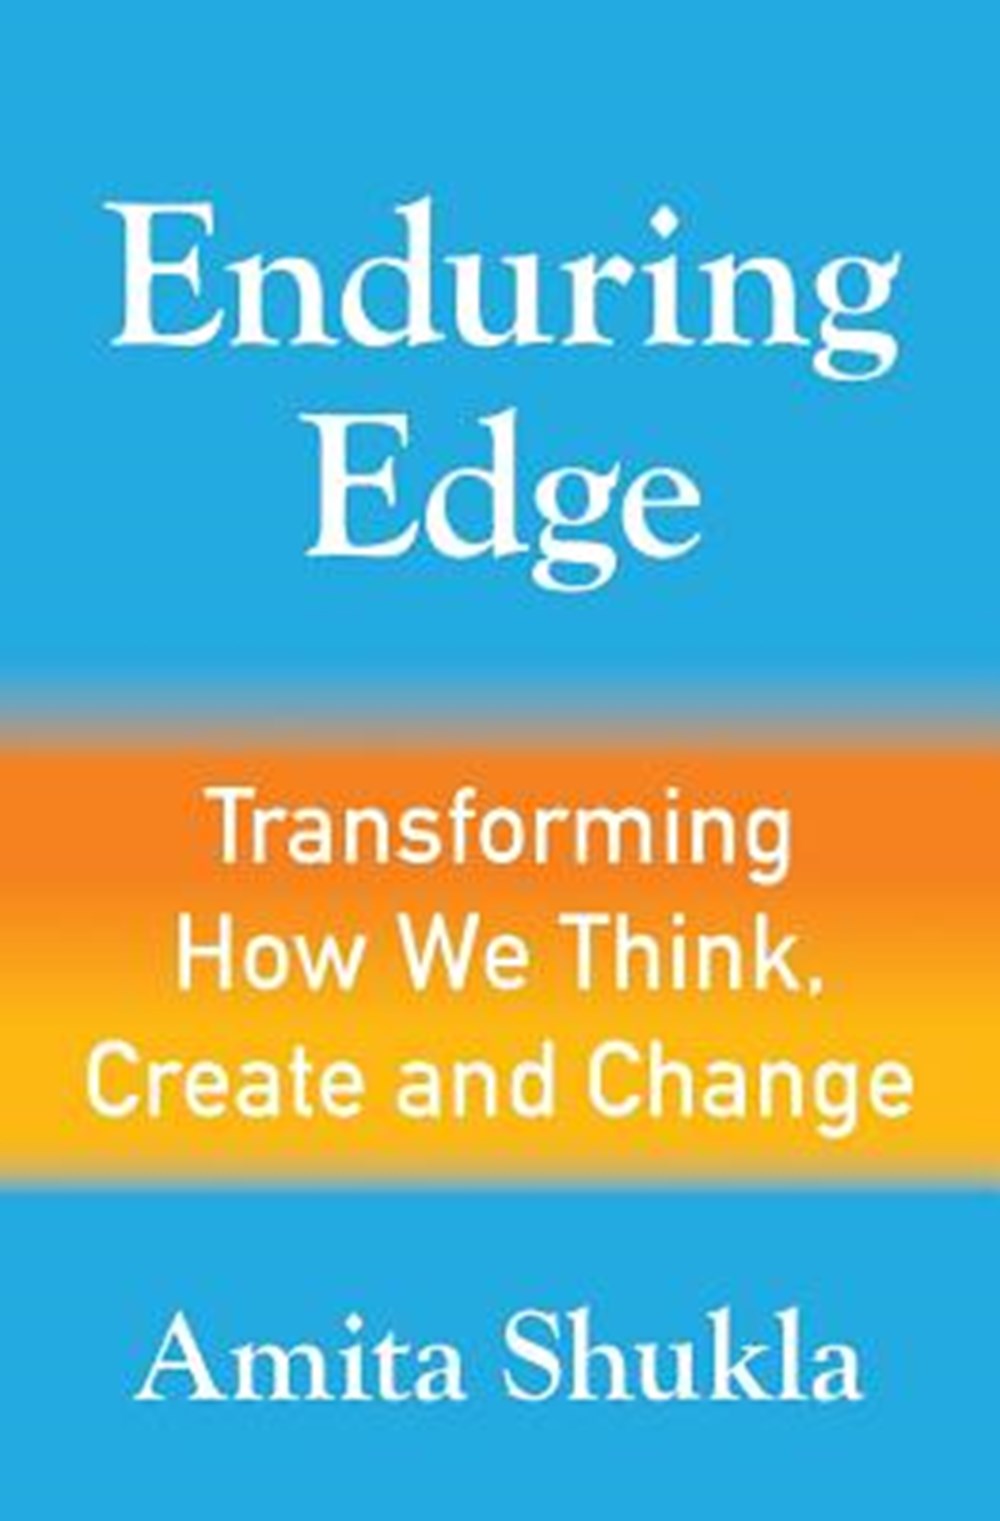 Enduring Edge Transforming How We Think, Create and Change